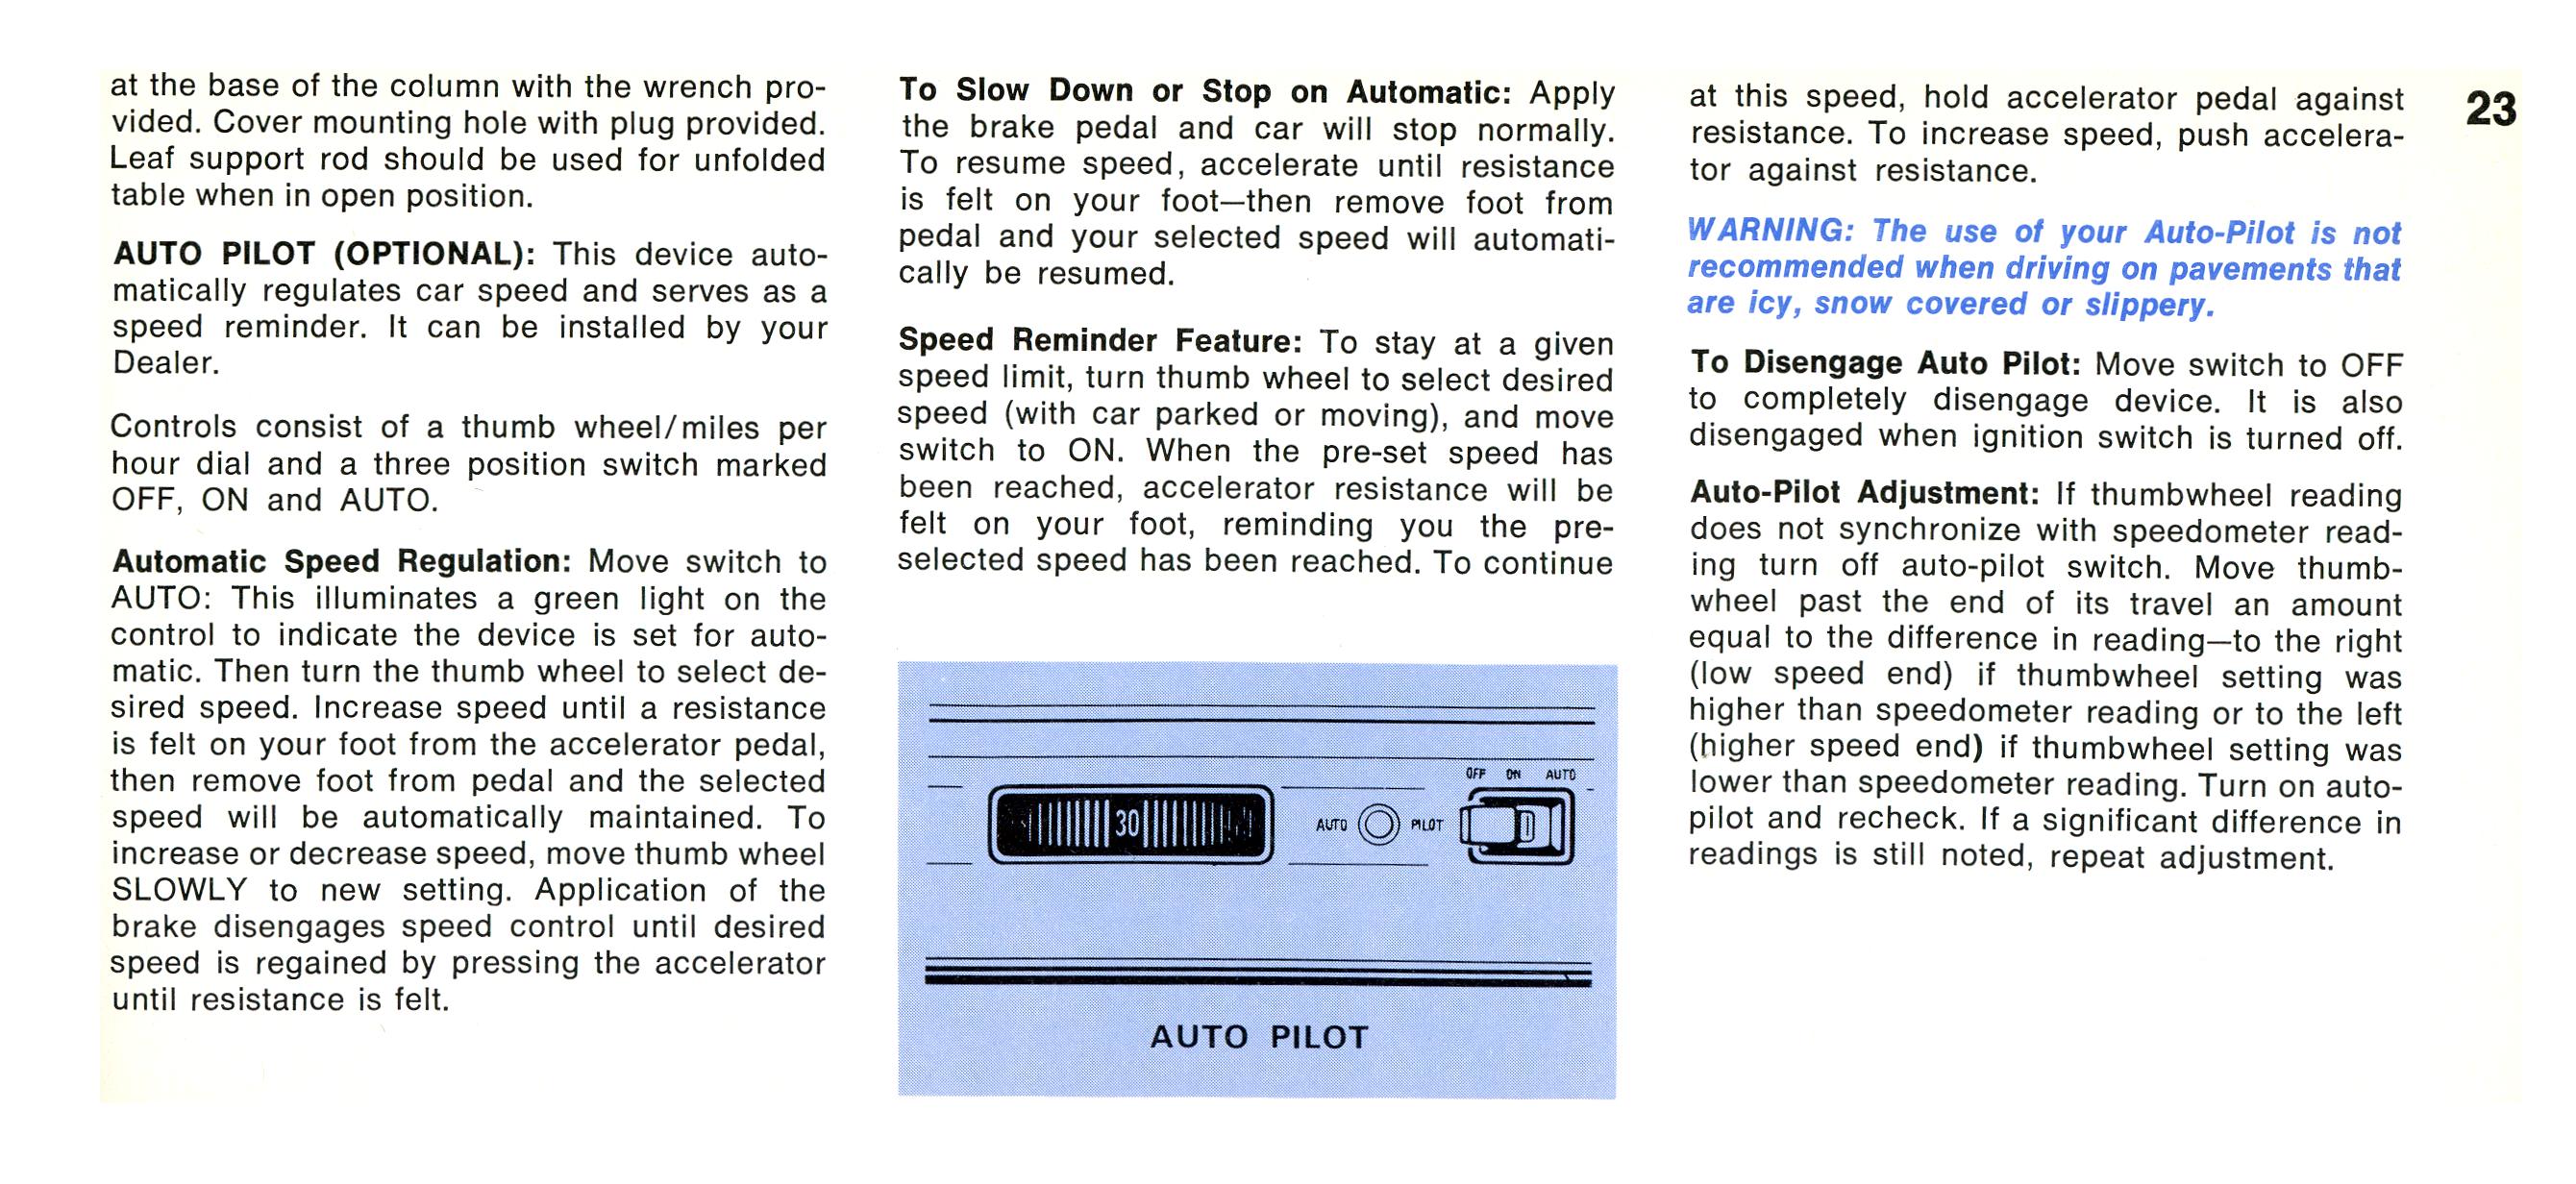 1968 Chrysler Imperial Owners Manual Page 30